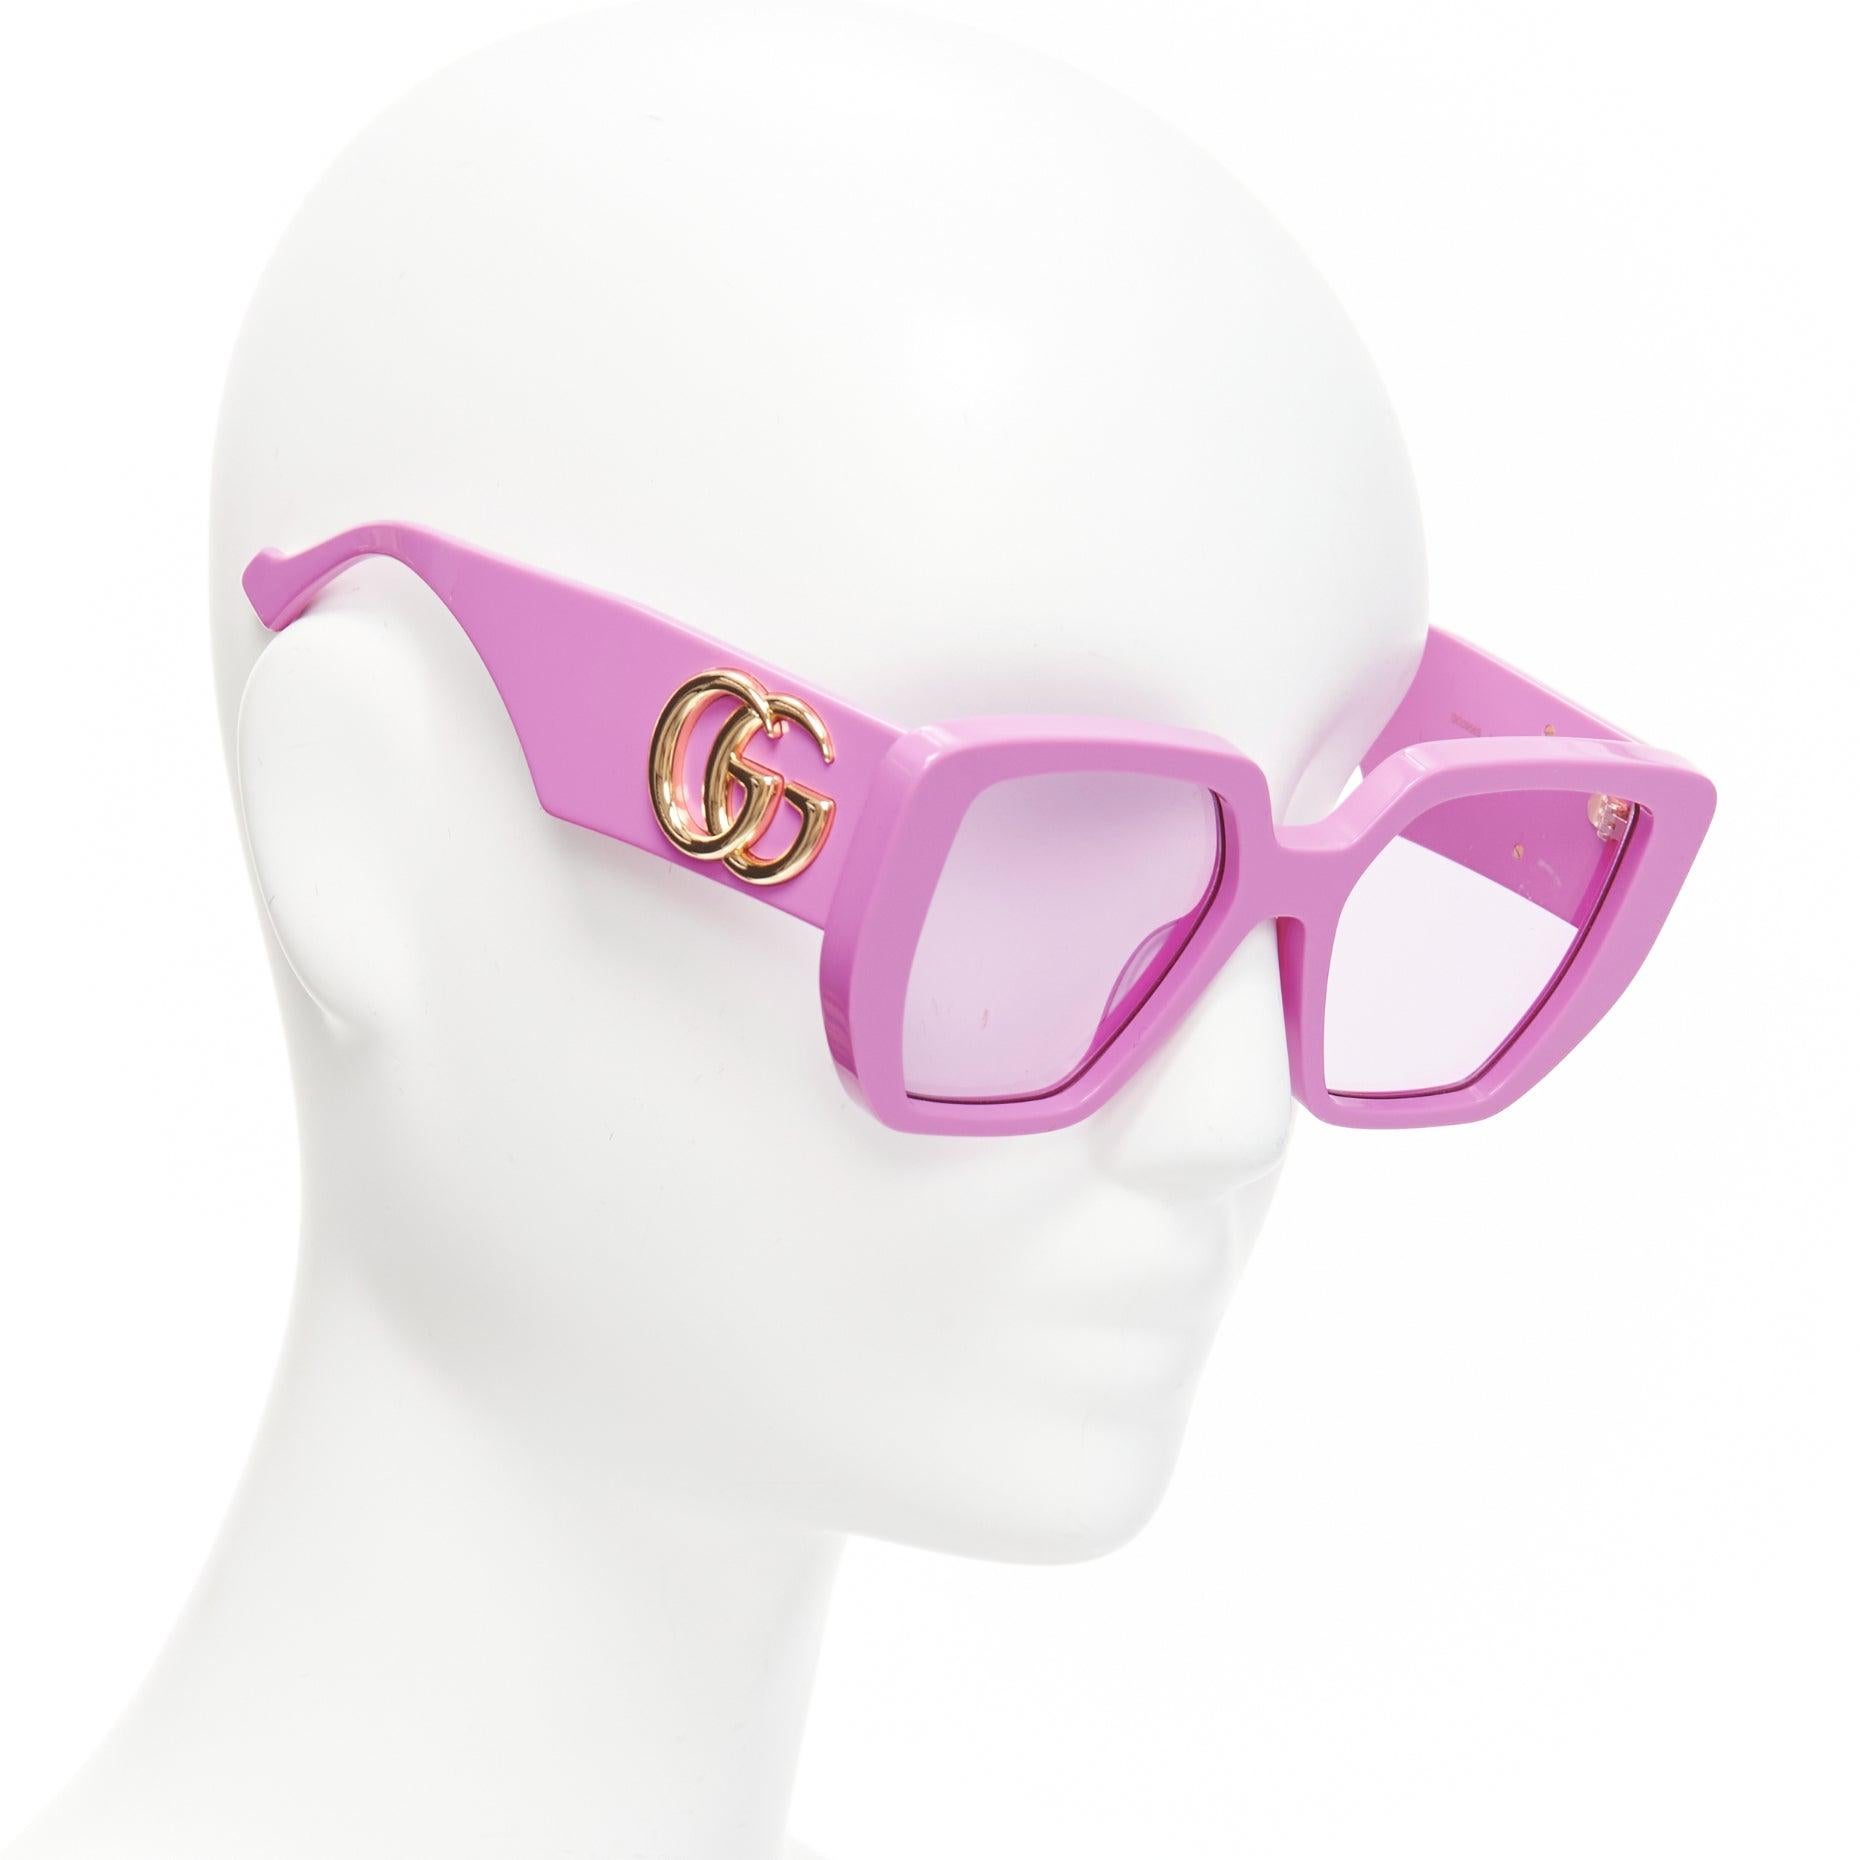 GUCCI Alessandro Michele GG0956S pink GG logo square frame oversized sunglasses
Reference: TGAS/D01033
Brand: Gucci
Designer: Alessandro Michele
Model: GG0956S
Material: Acetate
Color: Gold, Pink
Pattern: Solid
Lining: Pink Acetate
Extra Details: